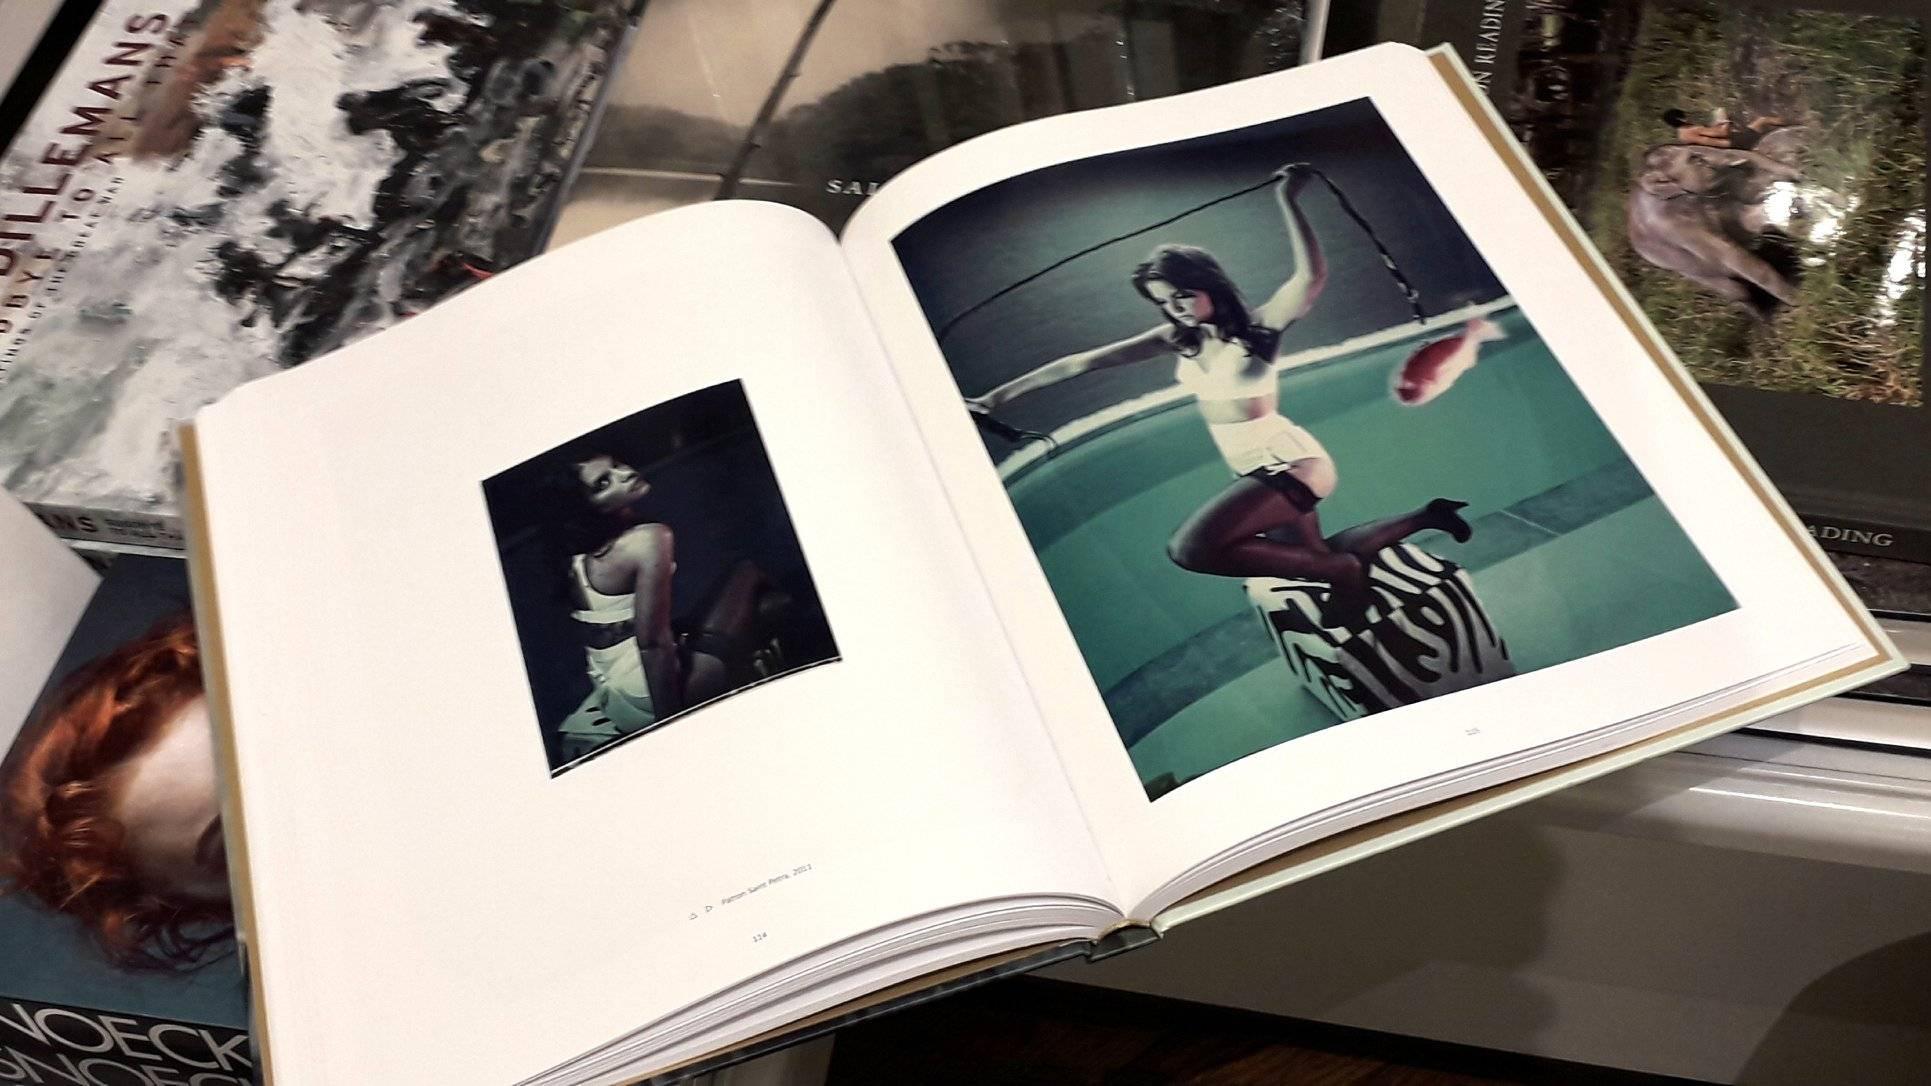 'The Eyes of the Fox' book signed including 'Eva Mouton', Edition of 3 - Gray Nude Photograph by Carmen de Vos